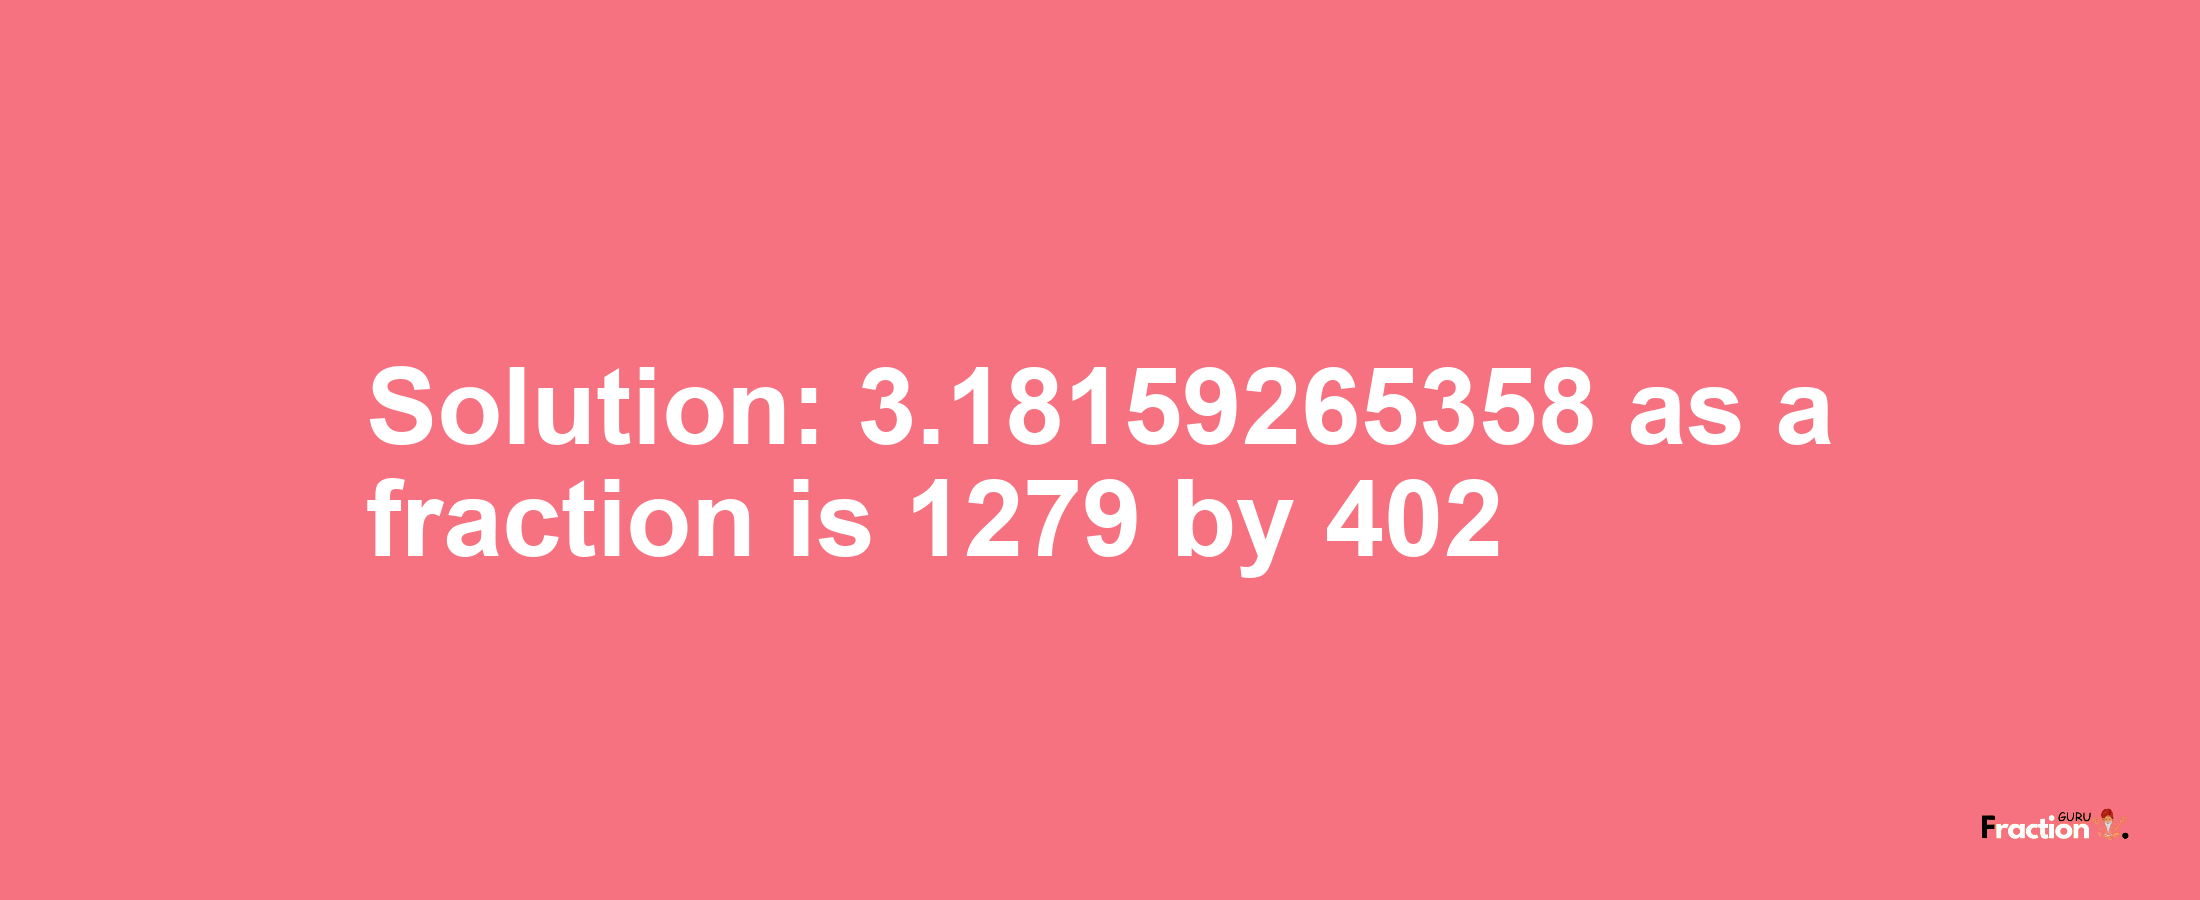 Solution:3.18159265358 as a fraction is 1279/402